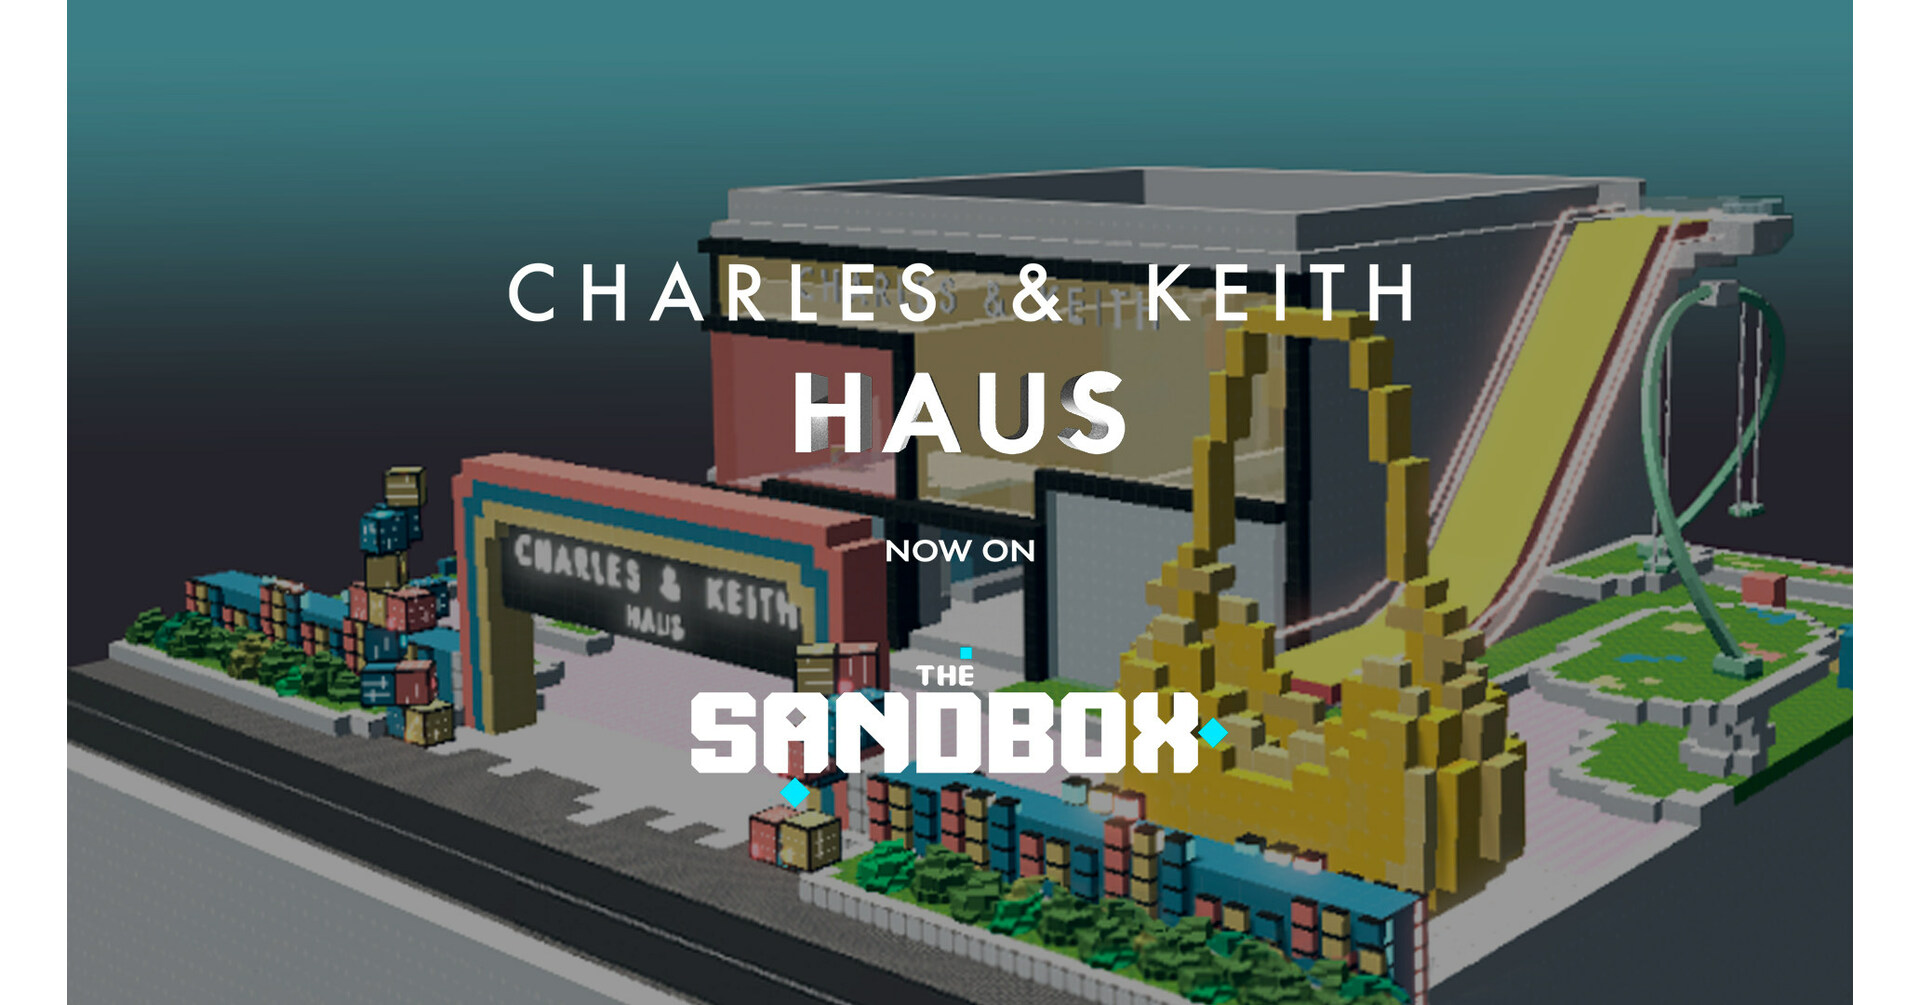 CHARLES & KEITH enters The Sandbox, opening doors to the first-ever CHARLESKEITHHAUS that offers quests and K-Pop concert performances by APOKI